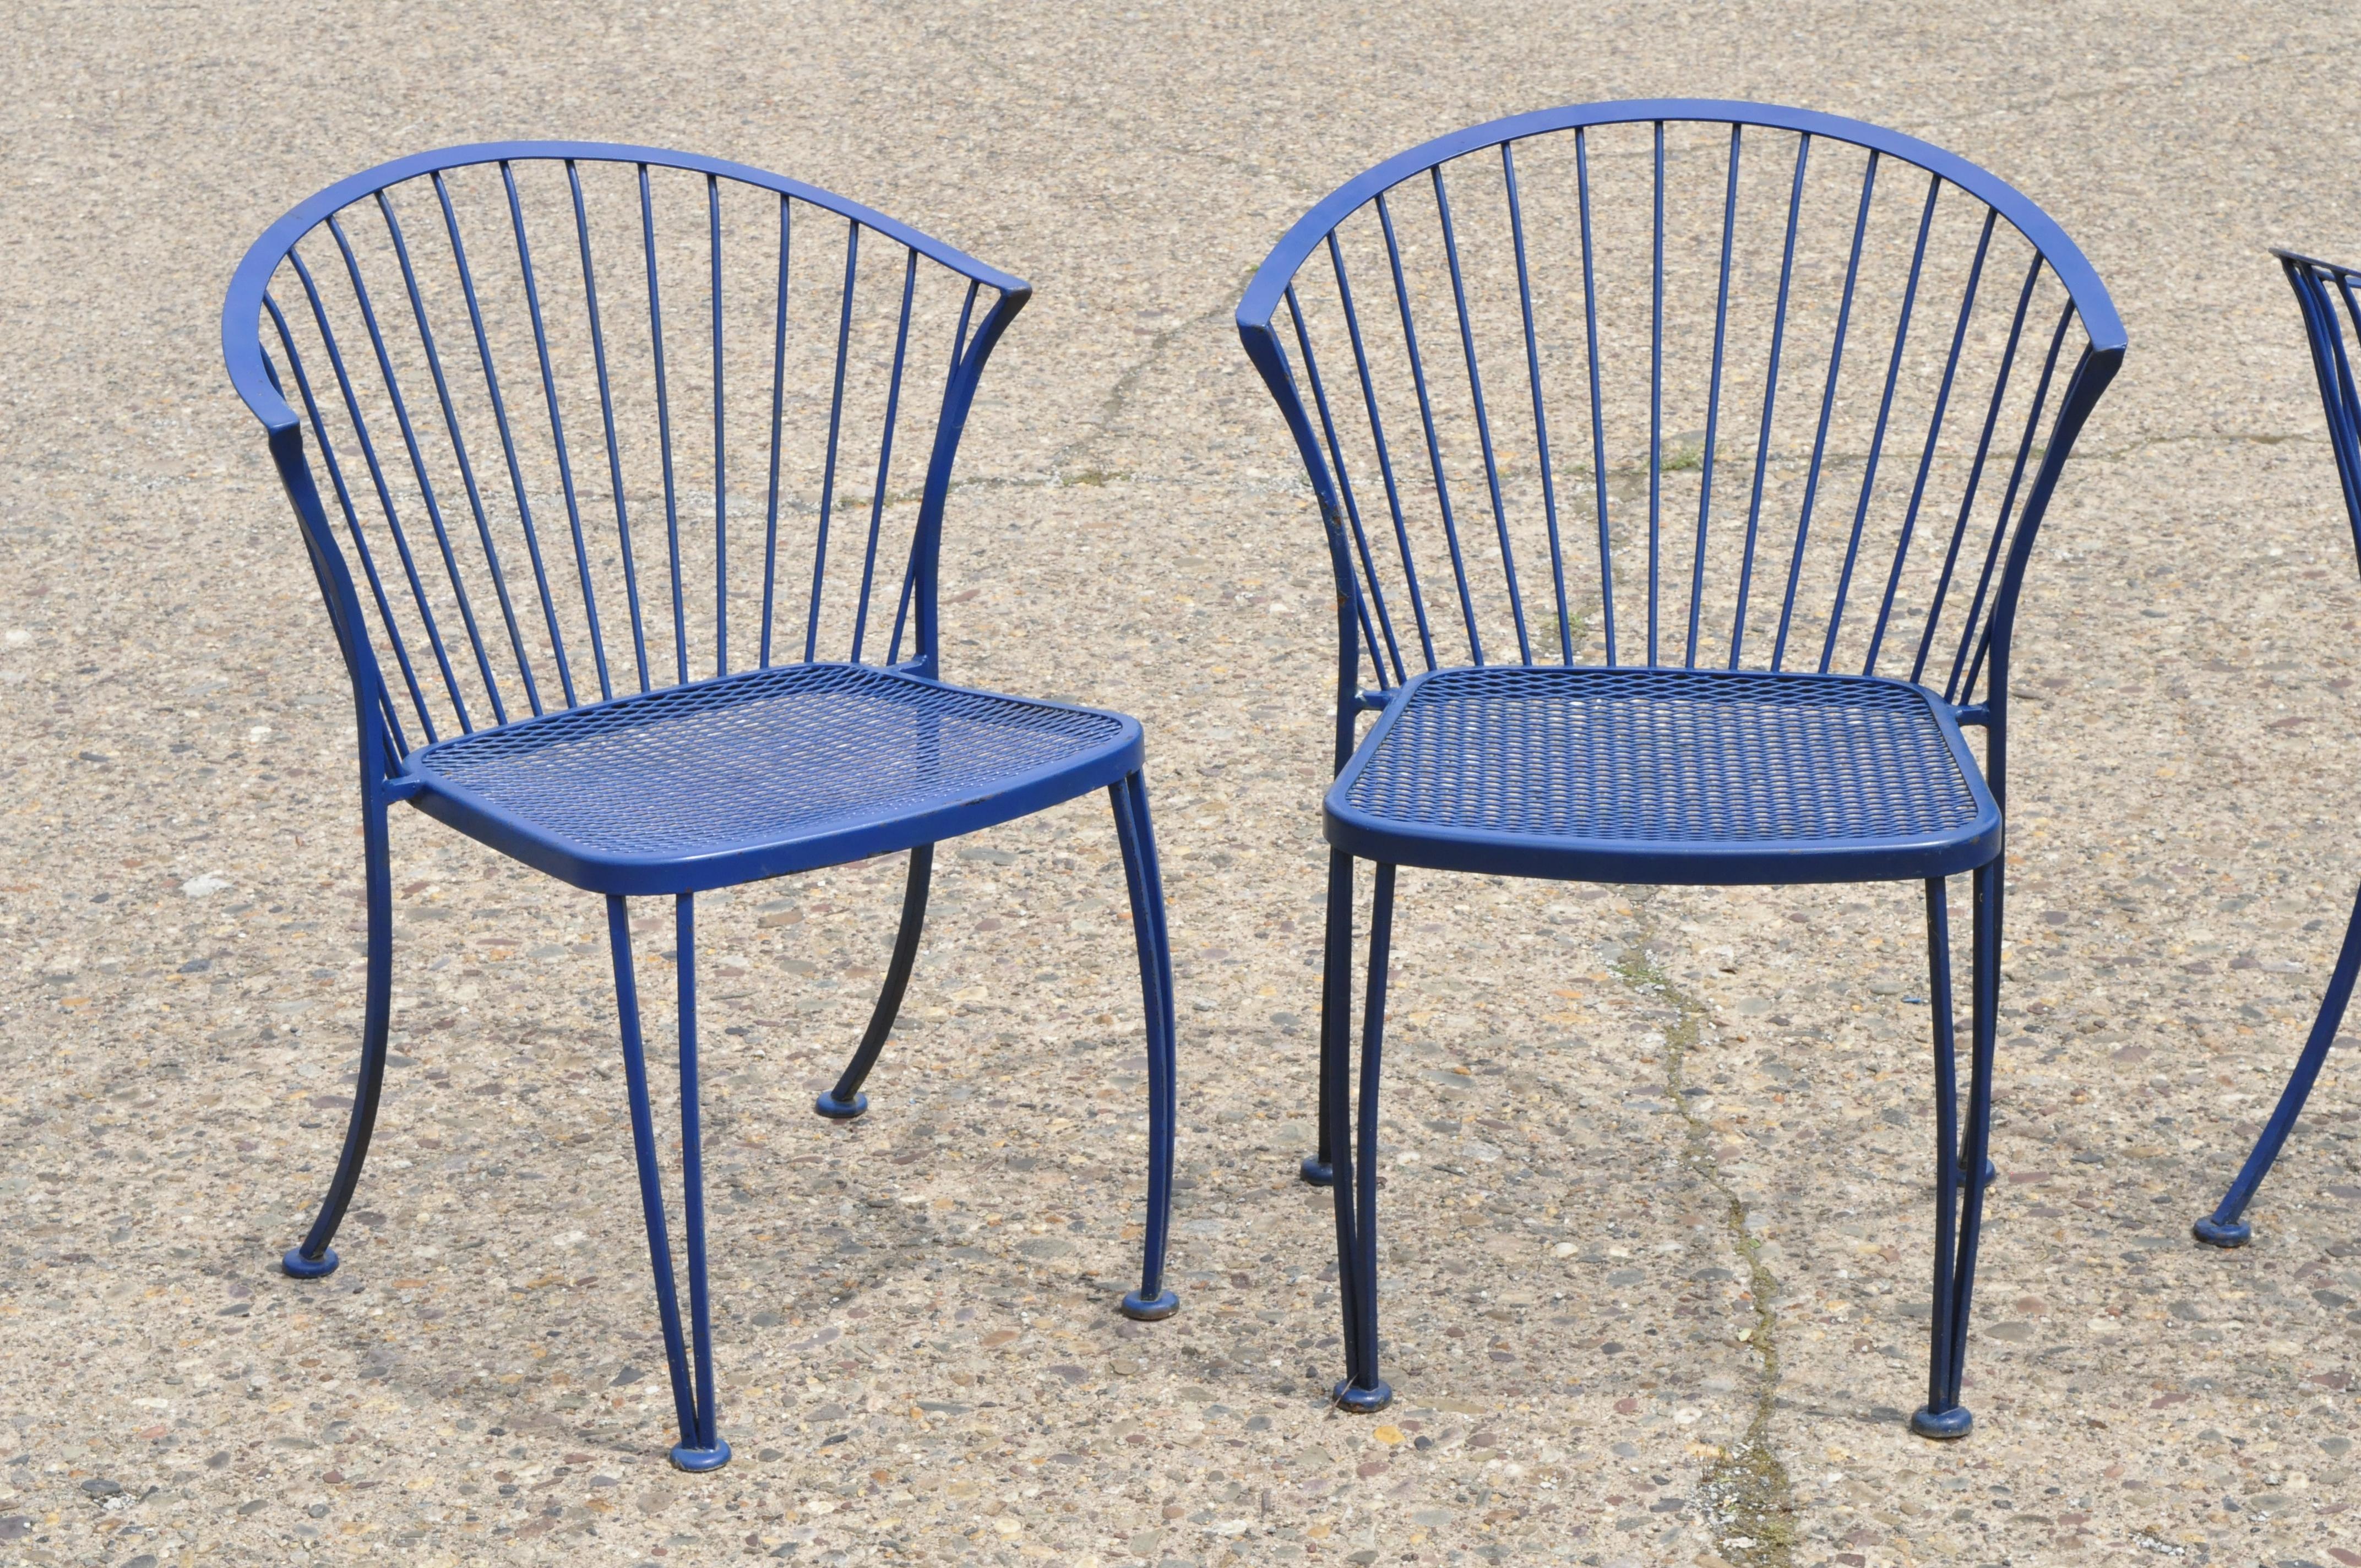 American Woodard Pinecrest Blue Wrought Iron 5pc Patio Garden Dining 4 Chairs Round Table